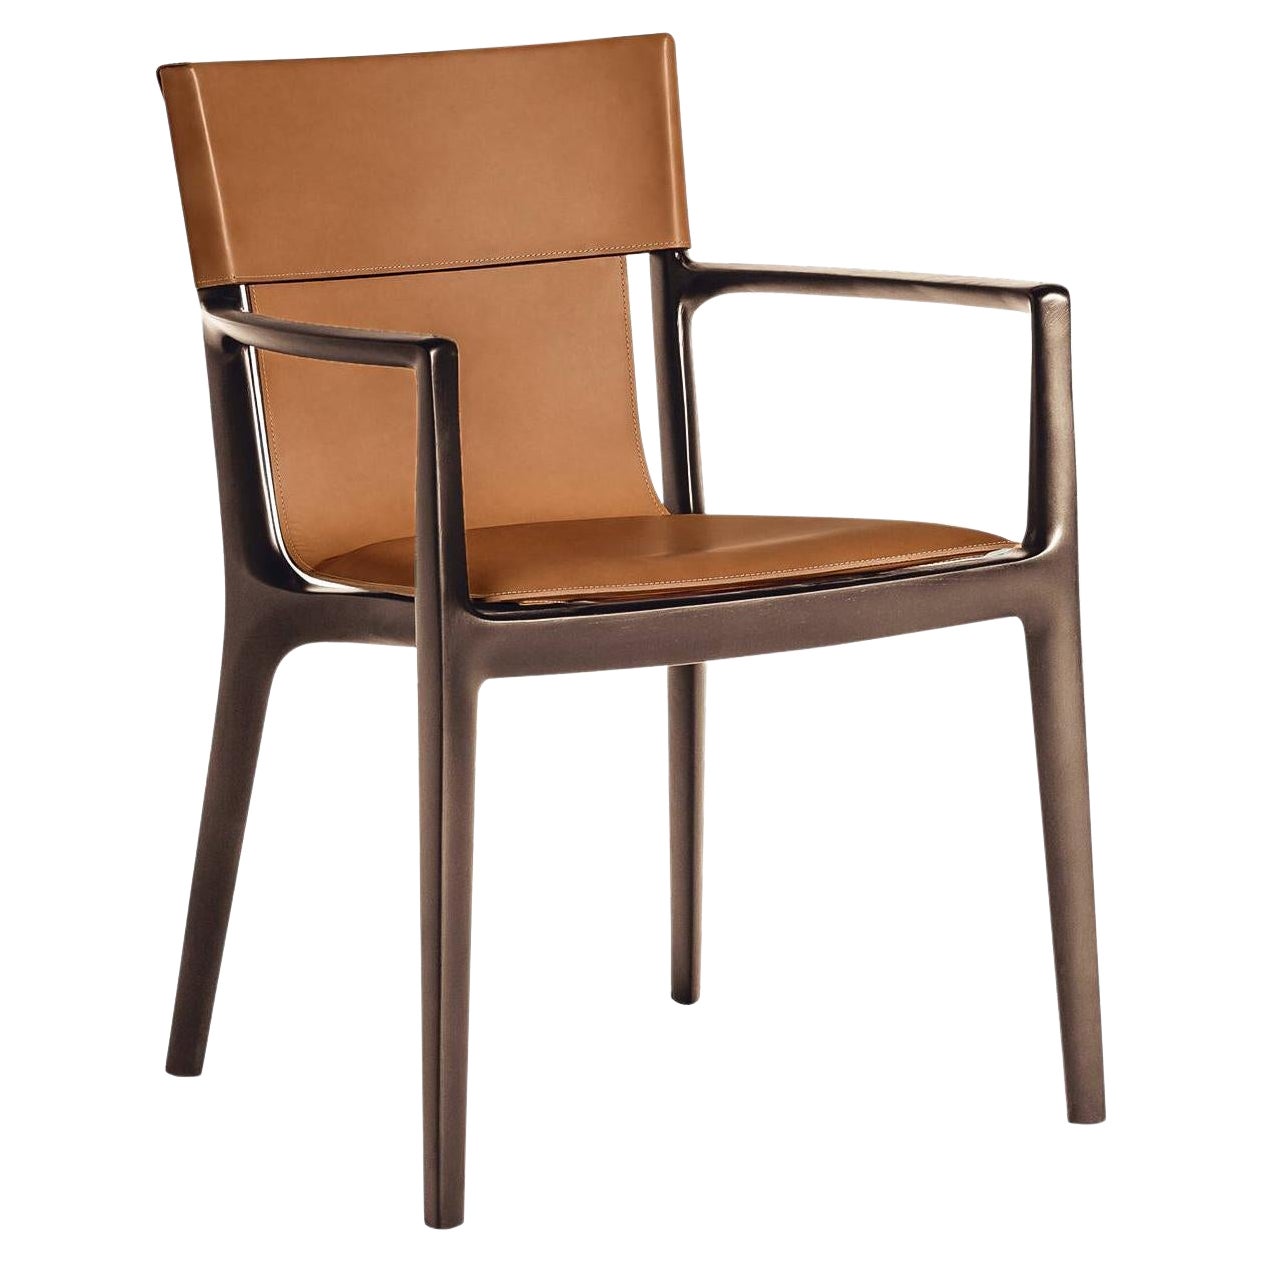 Isadora Chair with Arms Cammello Saddle Extra Leather Light Brown For Sale